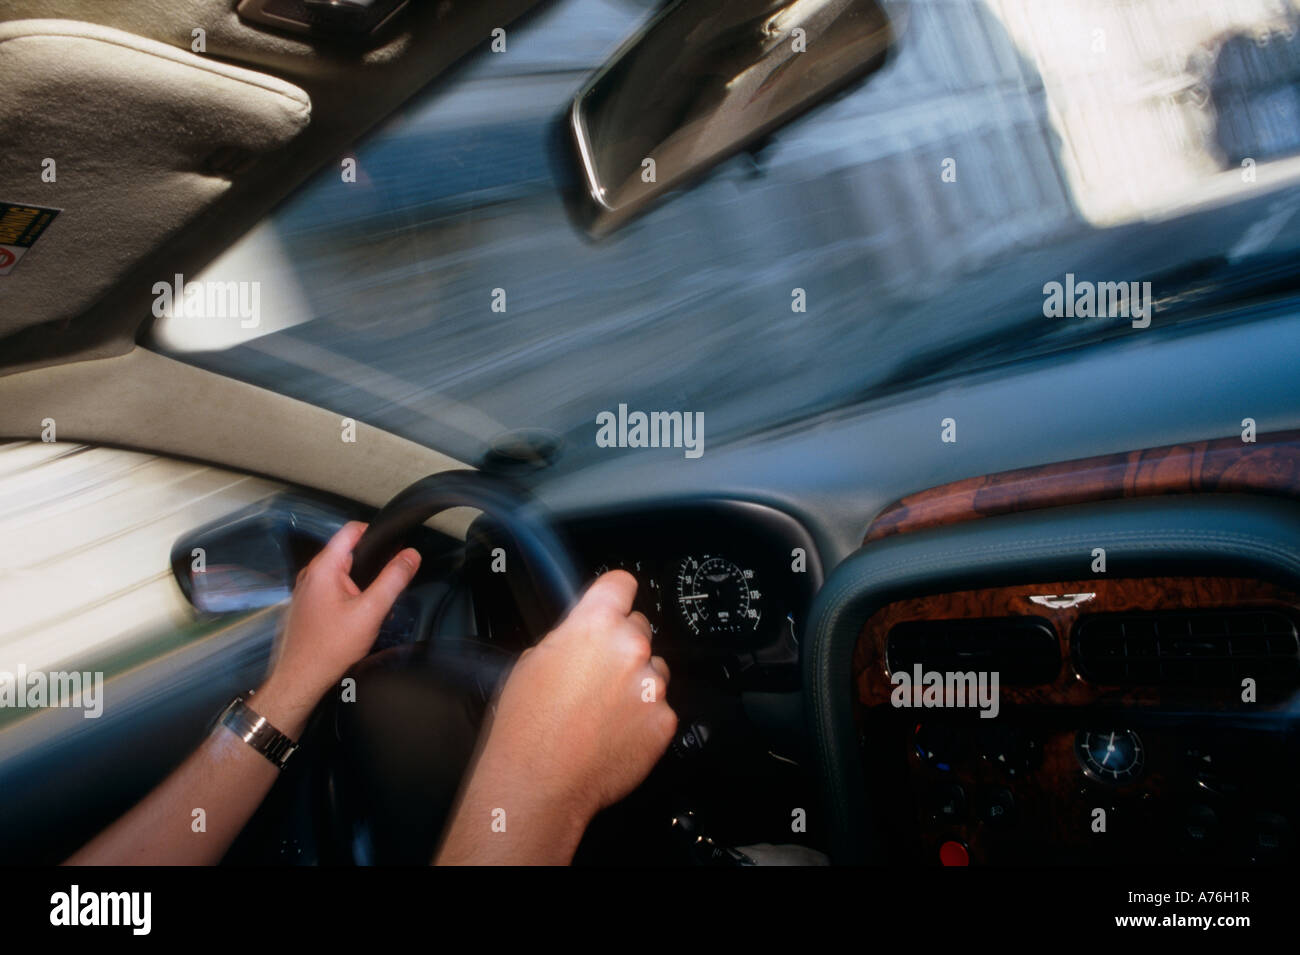 Interior of Aston Martin DB7 Vantage looking across steering wheel and drivers hands and being driven at speed Stock Photo